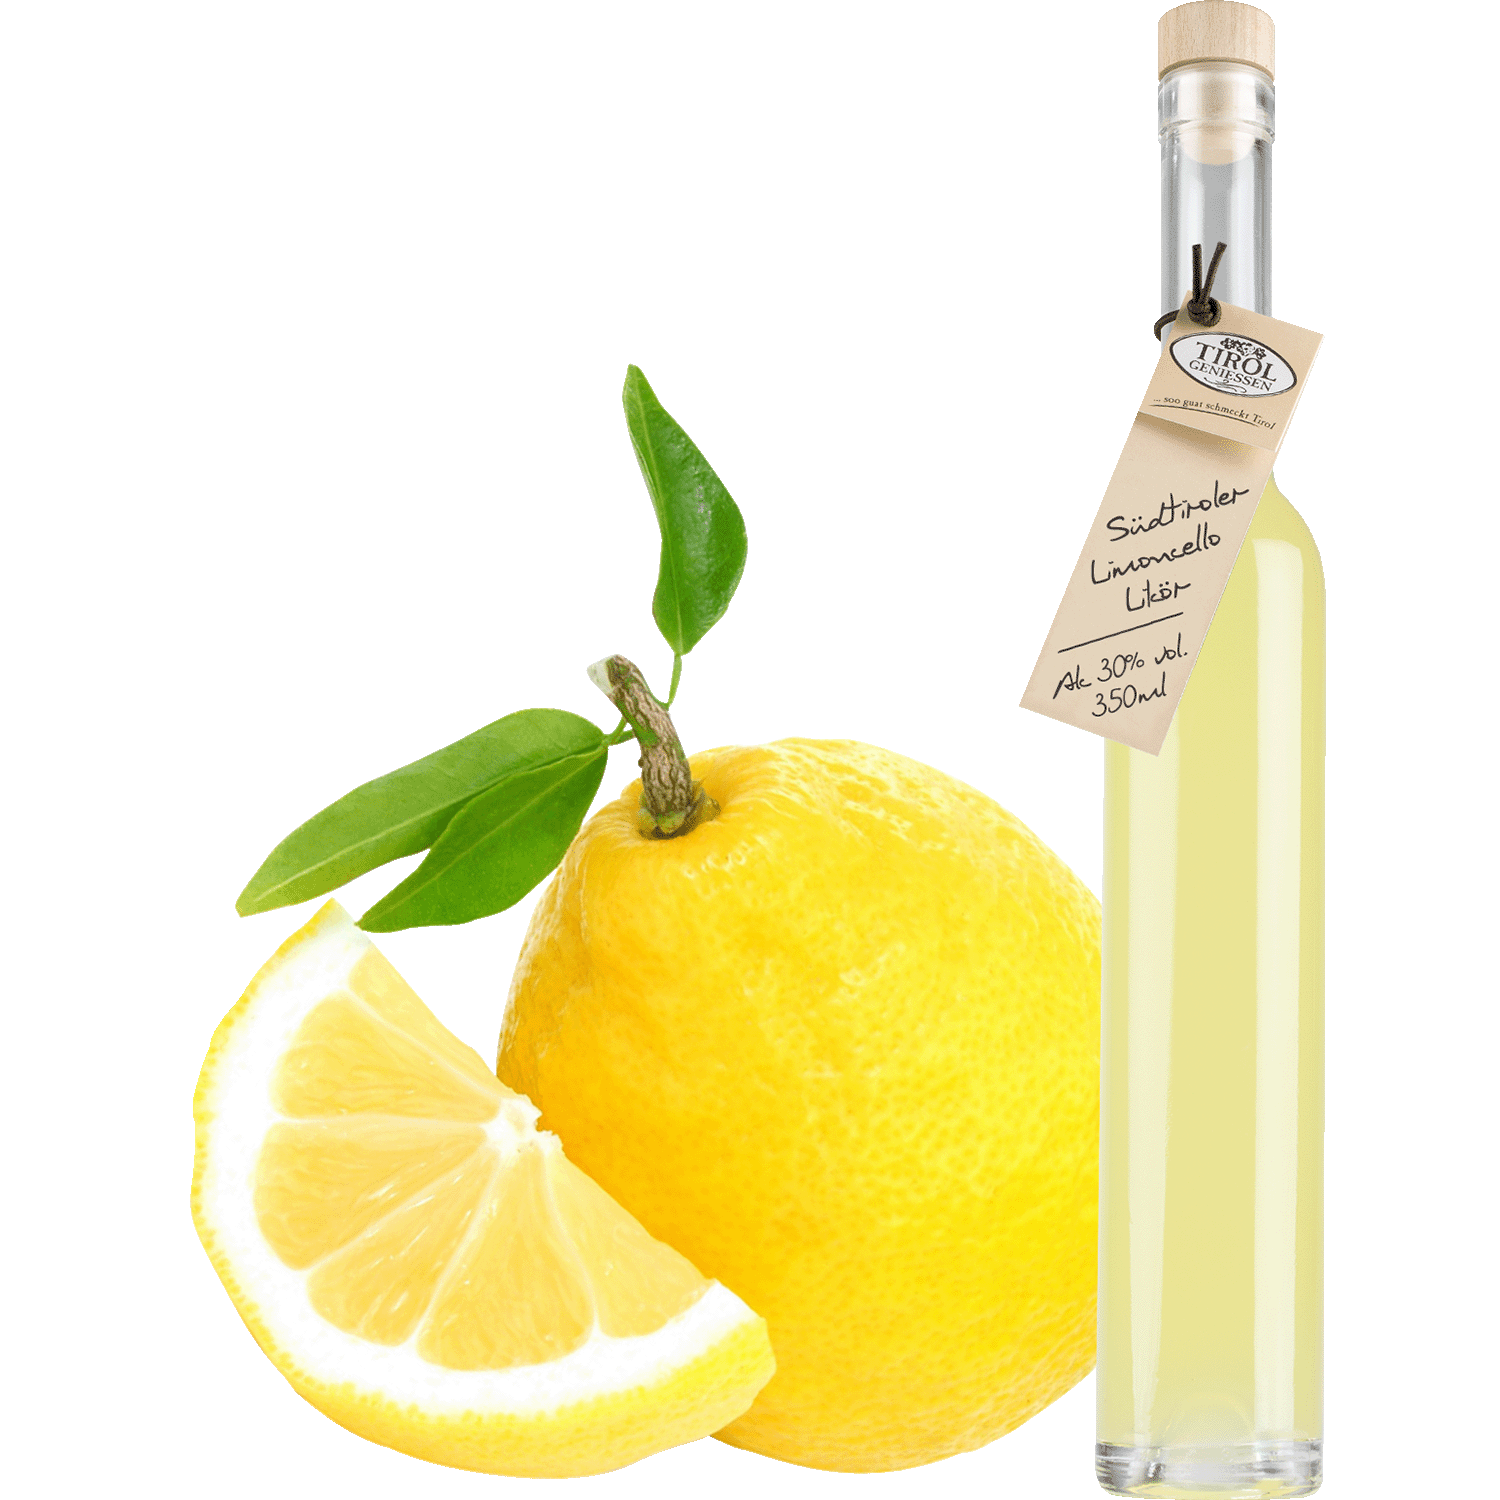 Limoncello Liqueur in gift bottle from South Tyrol from Tirol Geniessen